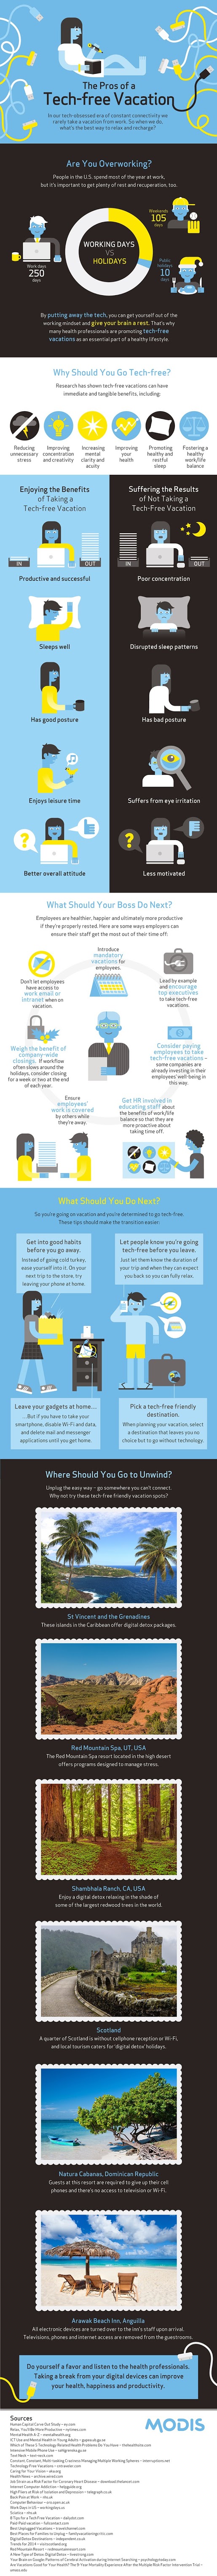 The Pros of a Tech-free Vacation #infographic